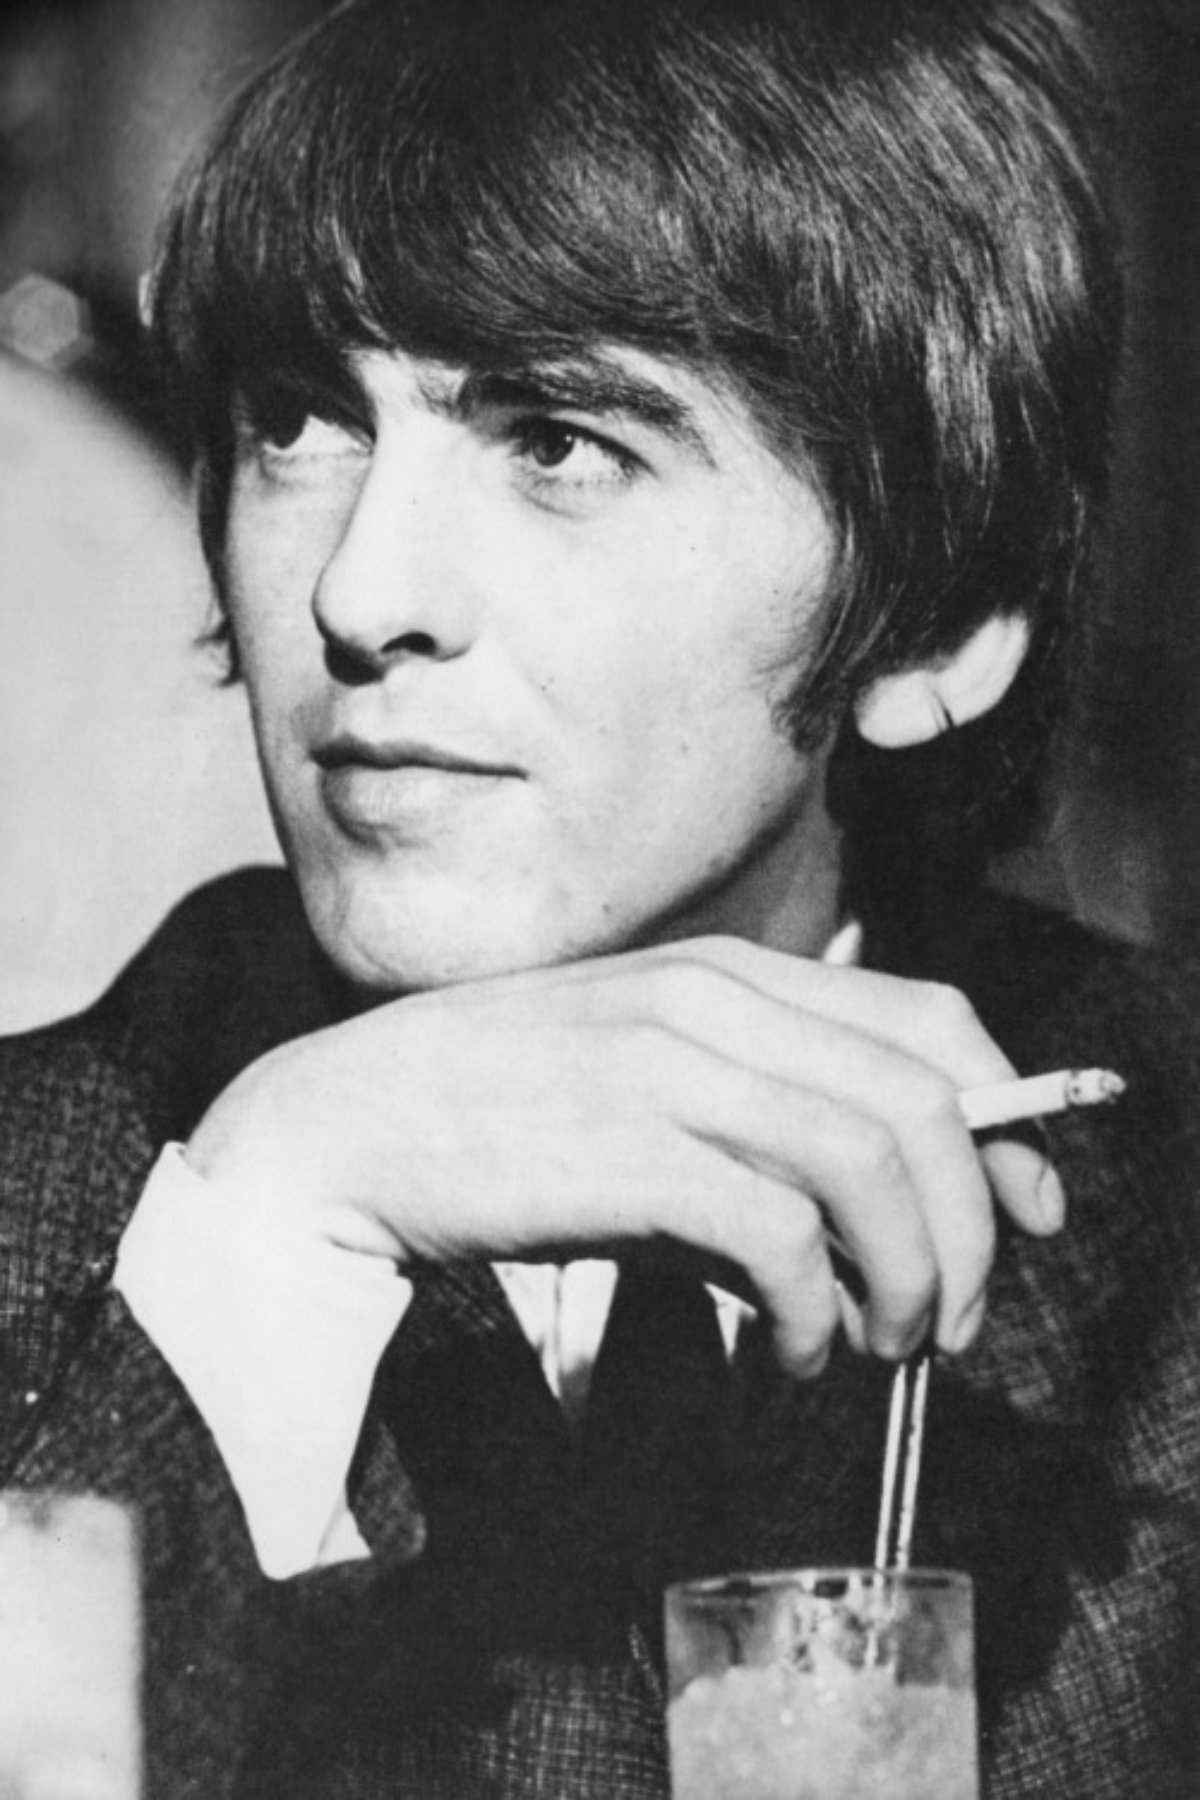 Harrison is best known as the lead guitarist for The Beatles.